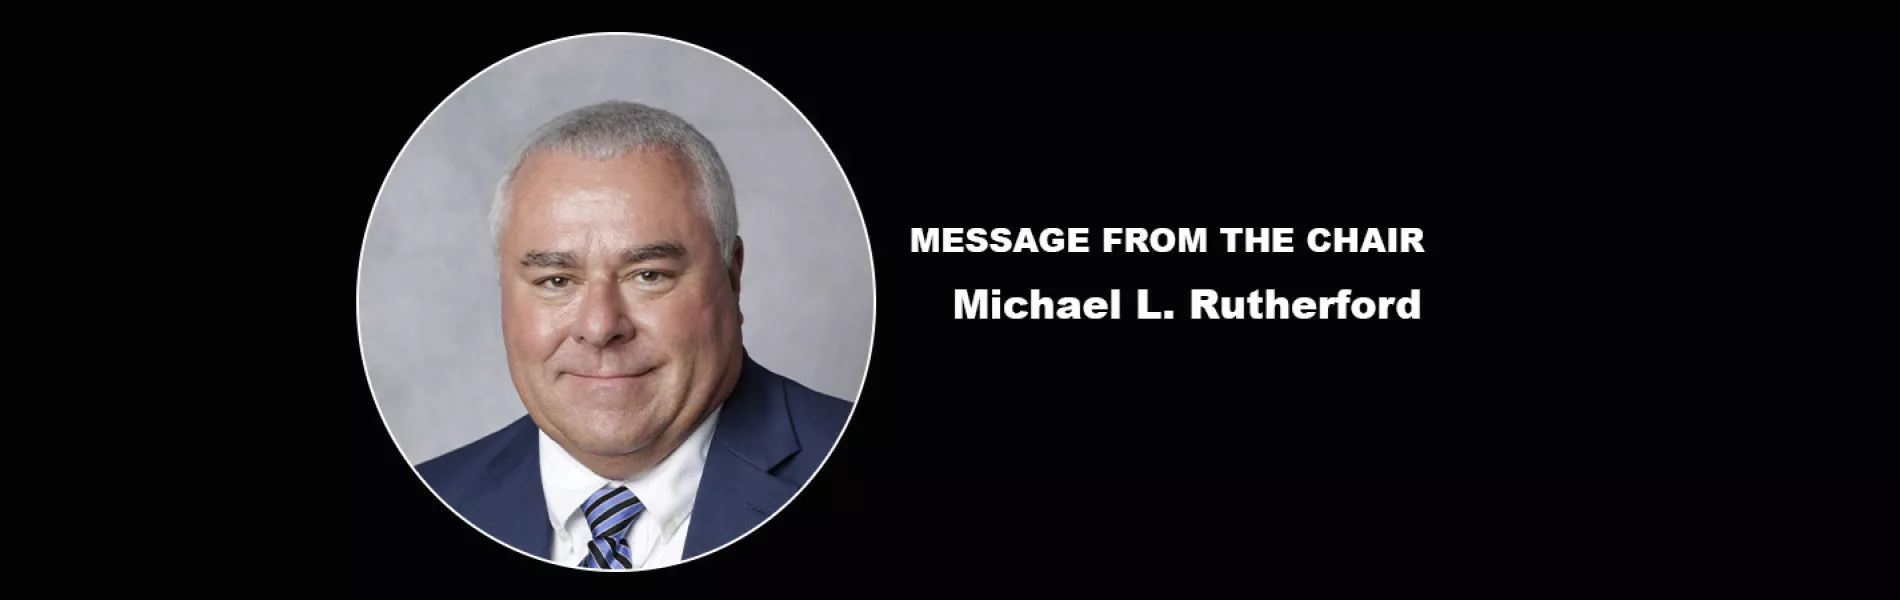 Message from the Chair: Michael L. Rutherford